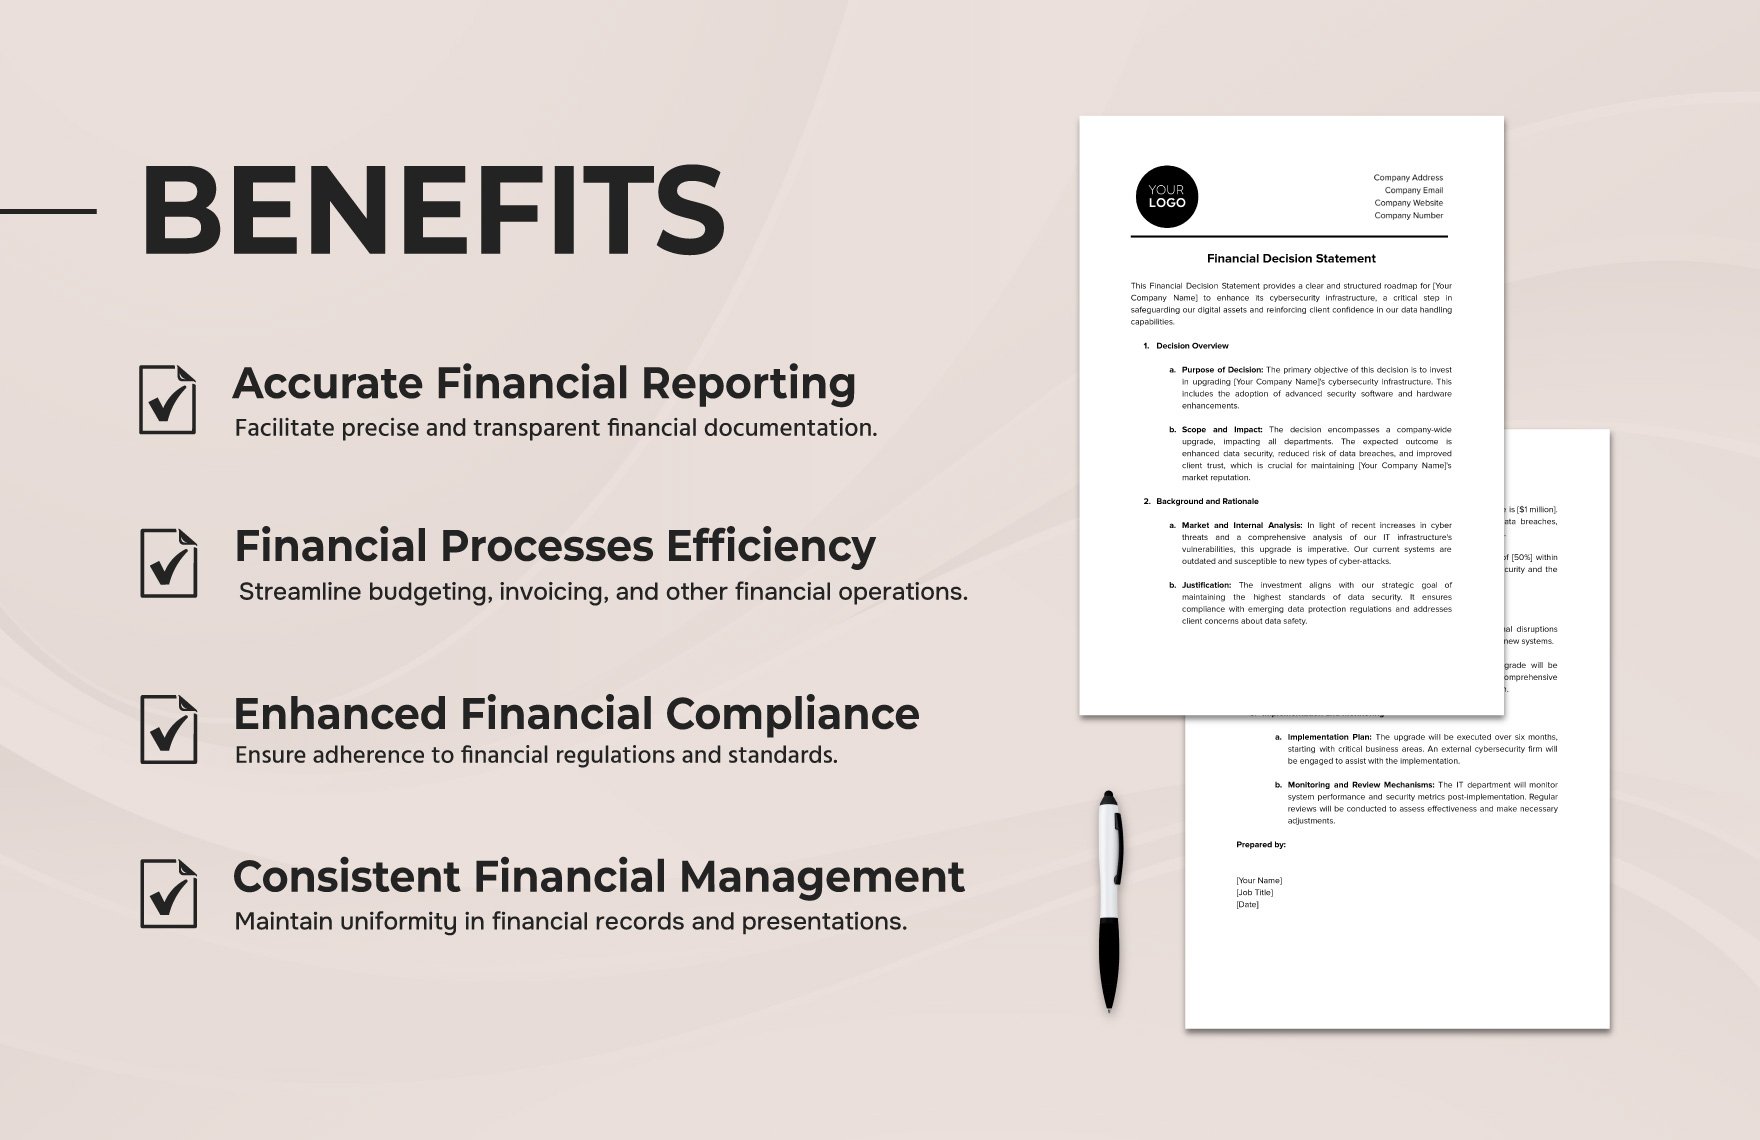 Financial Decision Statement Template